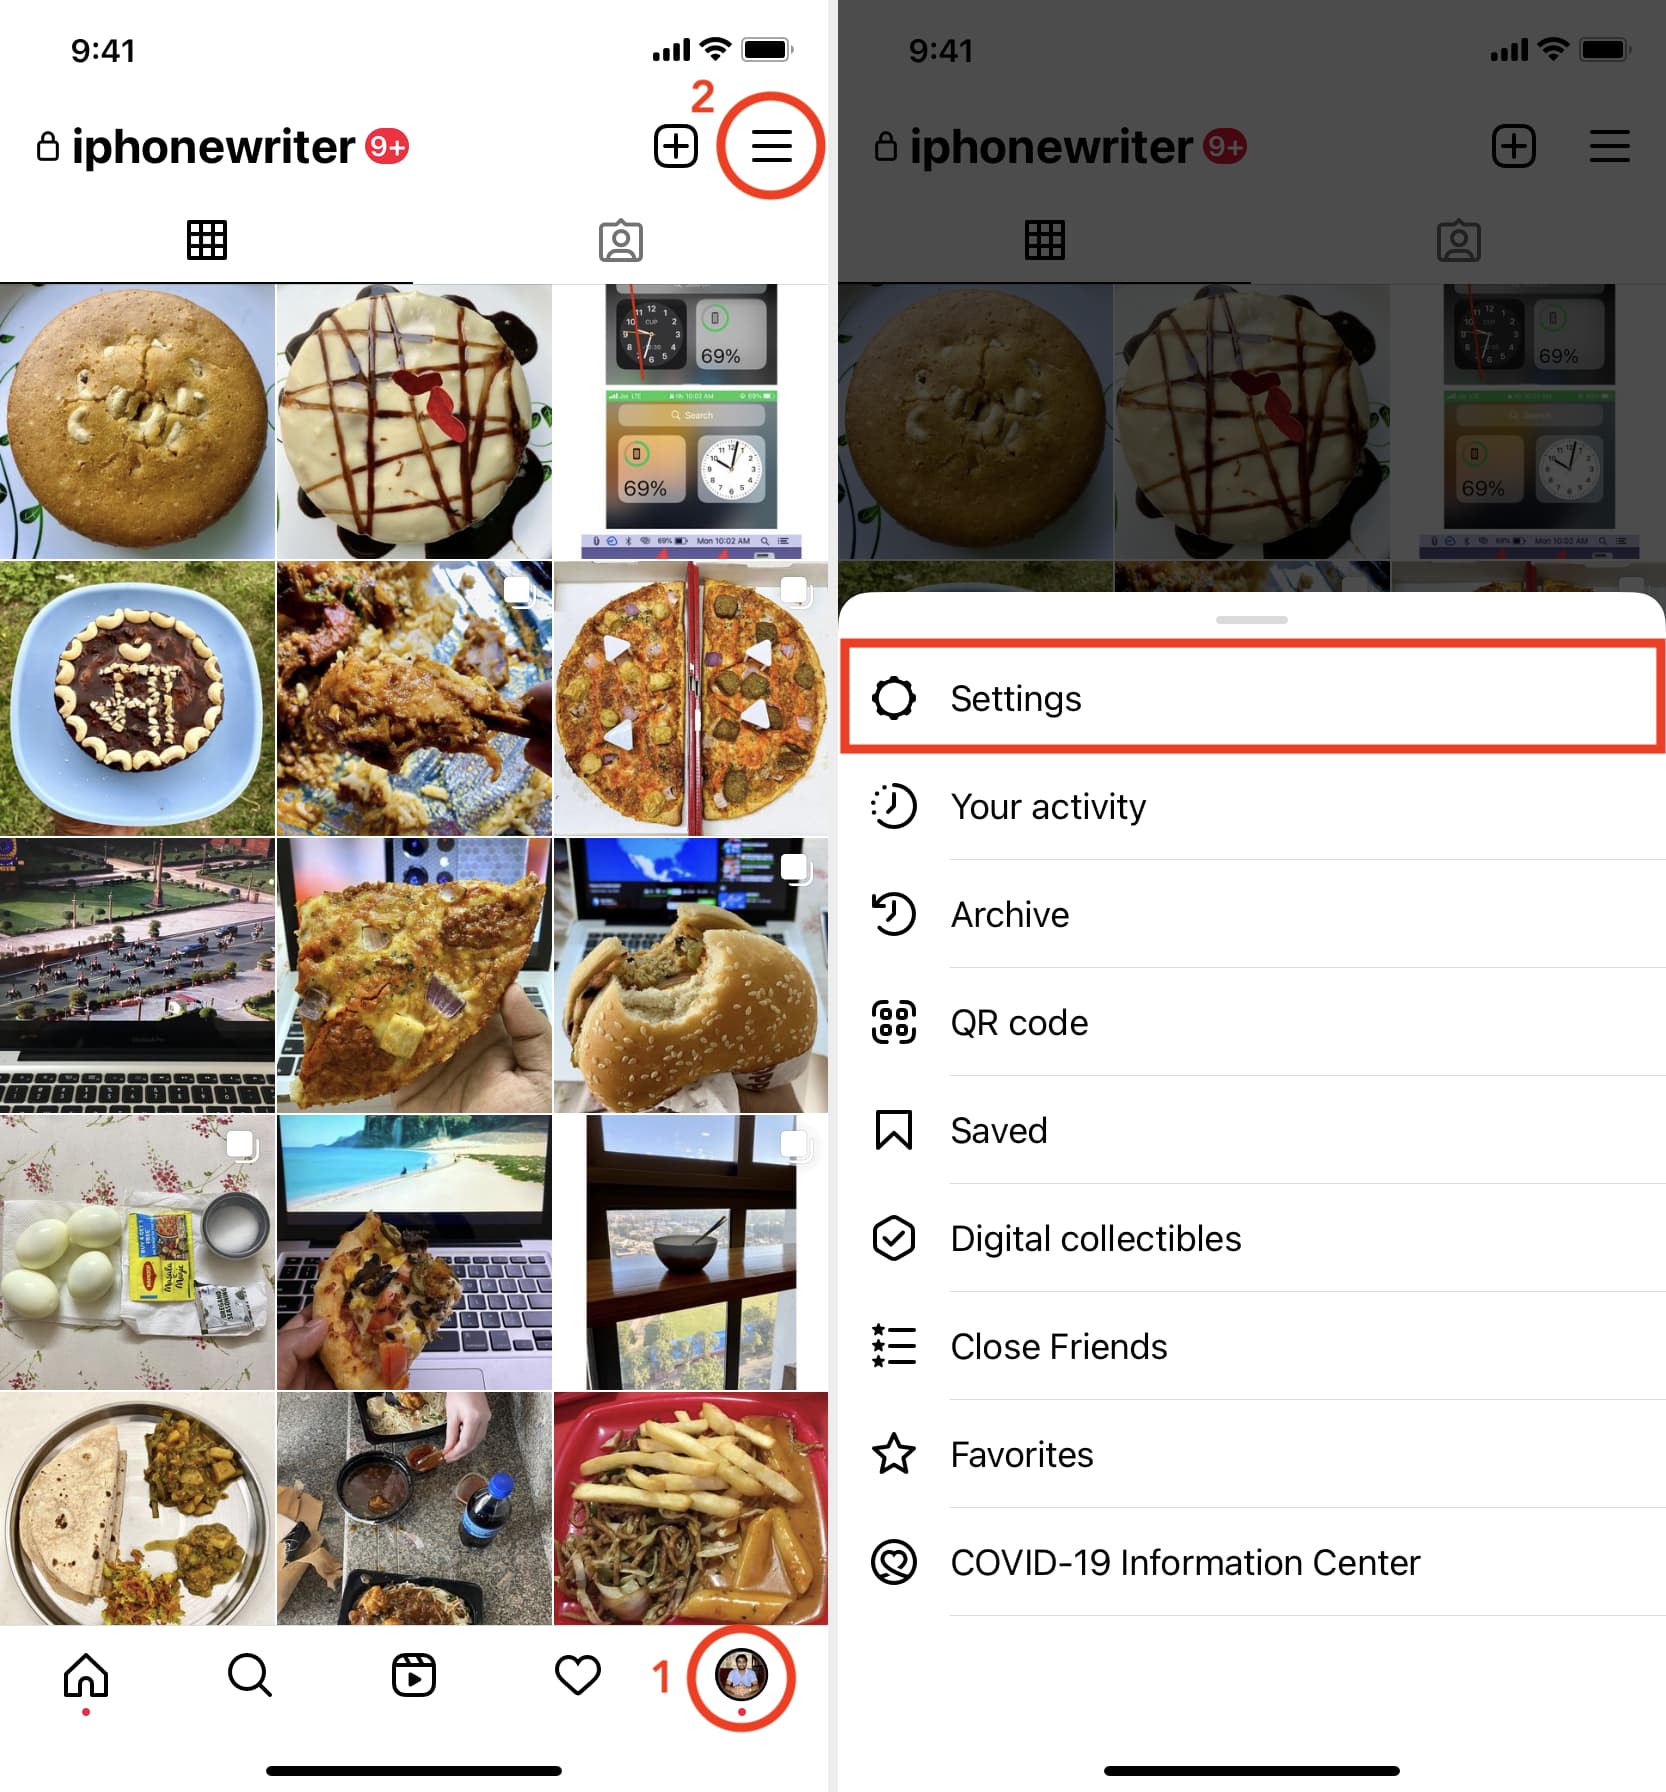 Go to Instagram Settings on iPhone